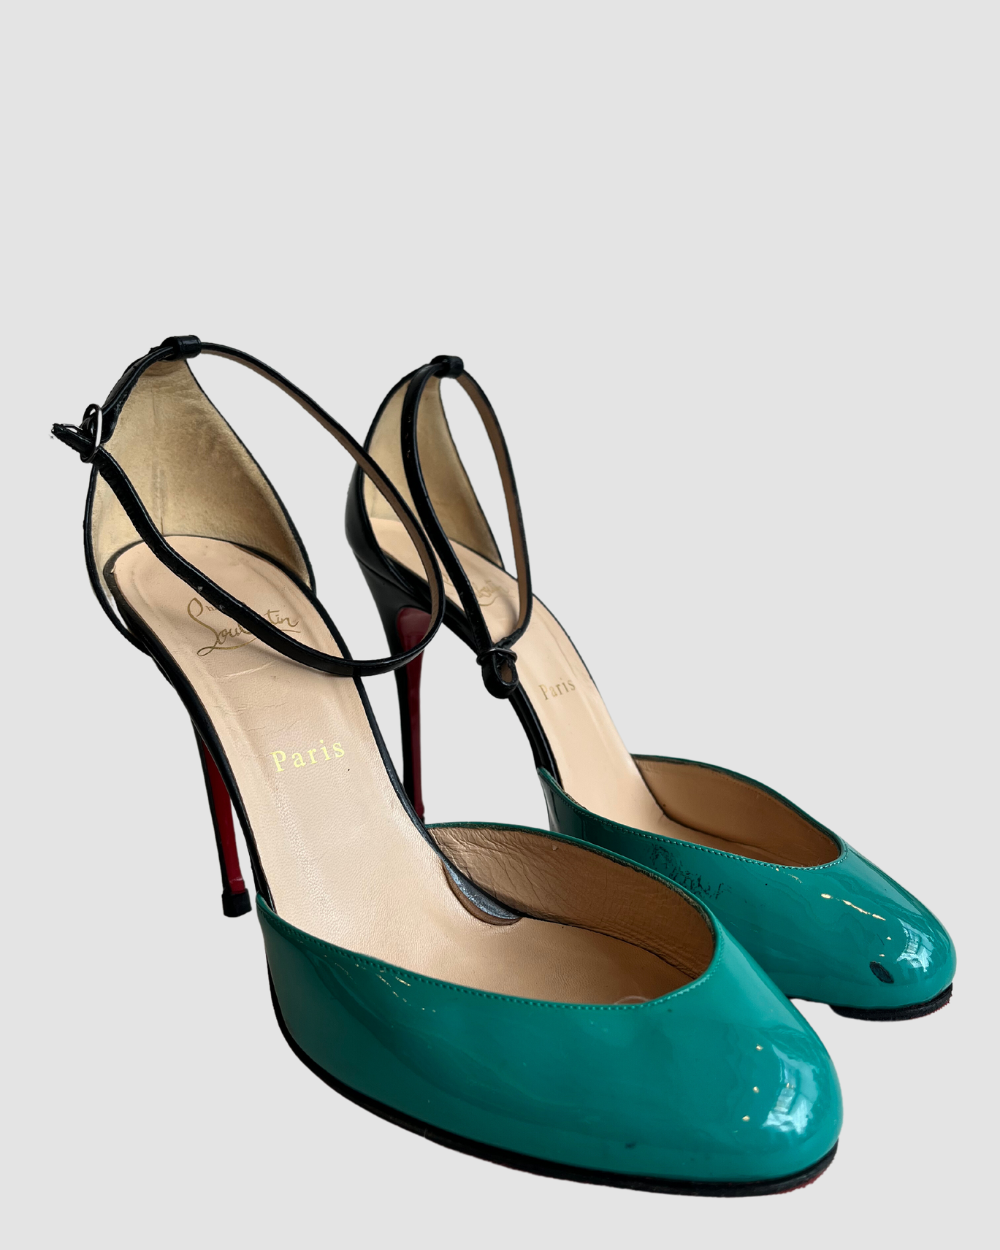 Christian Louboutin Teal & Black Patent Leather Heels, 40.5